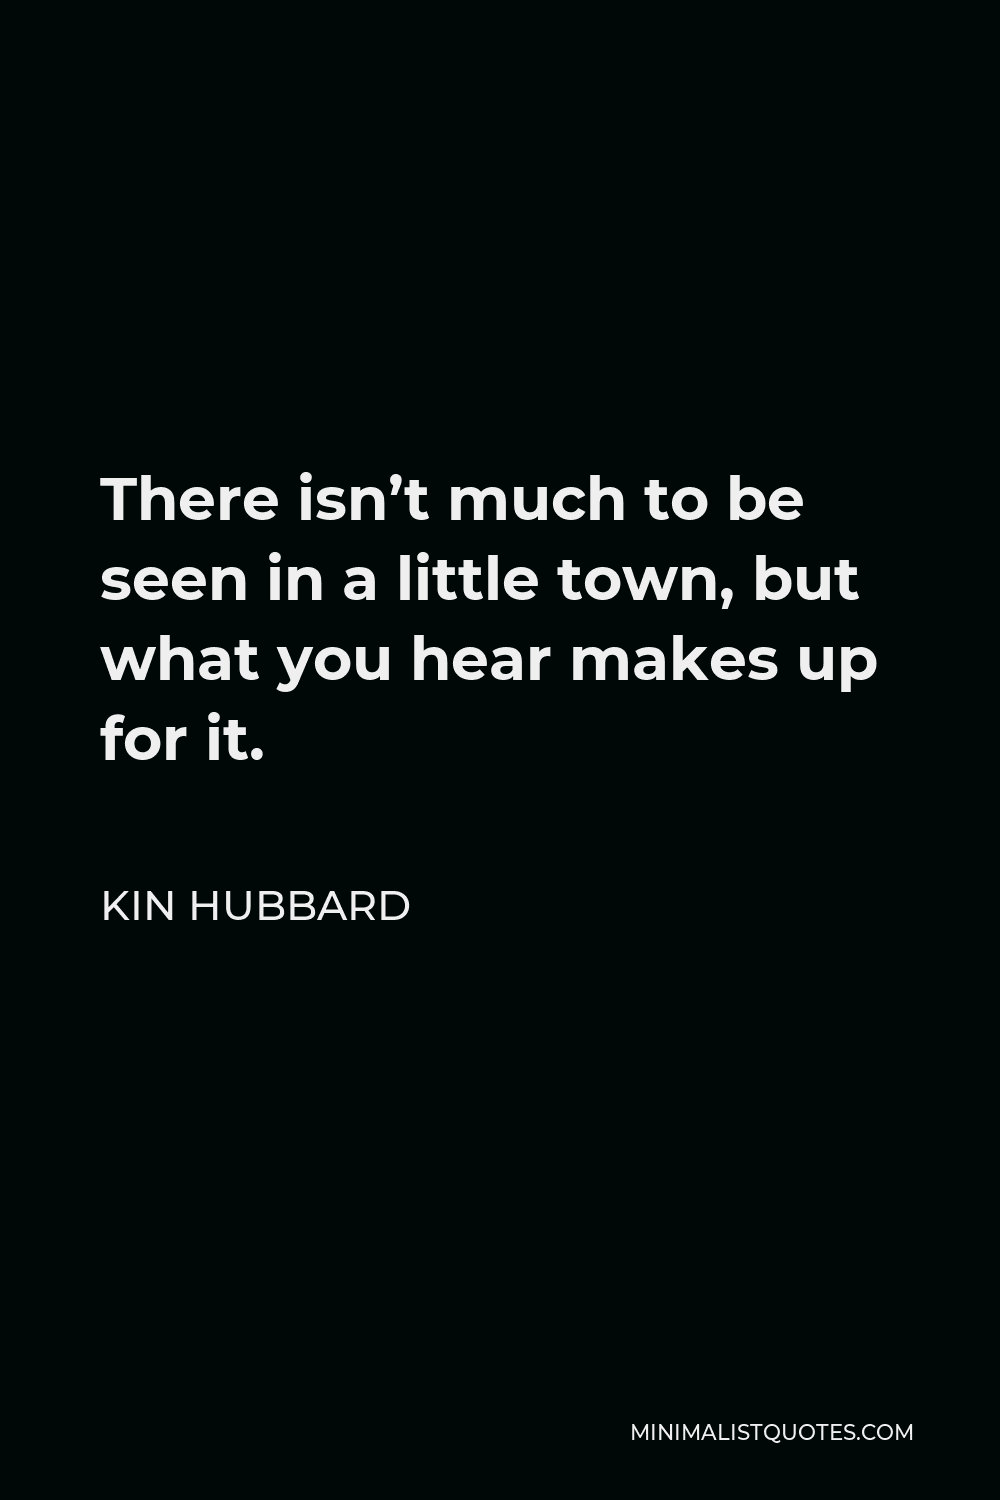 Kin Hubbard Quote - There isn’t much to be seen in a little town, but what you hear makes up for it.